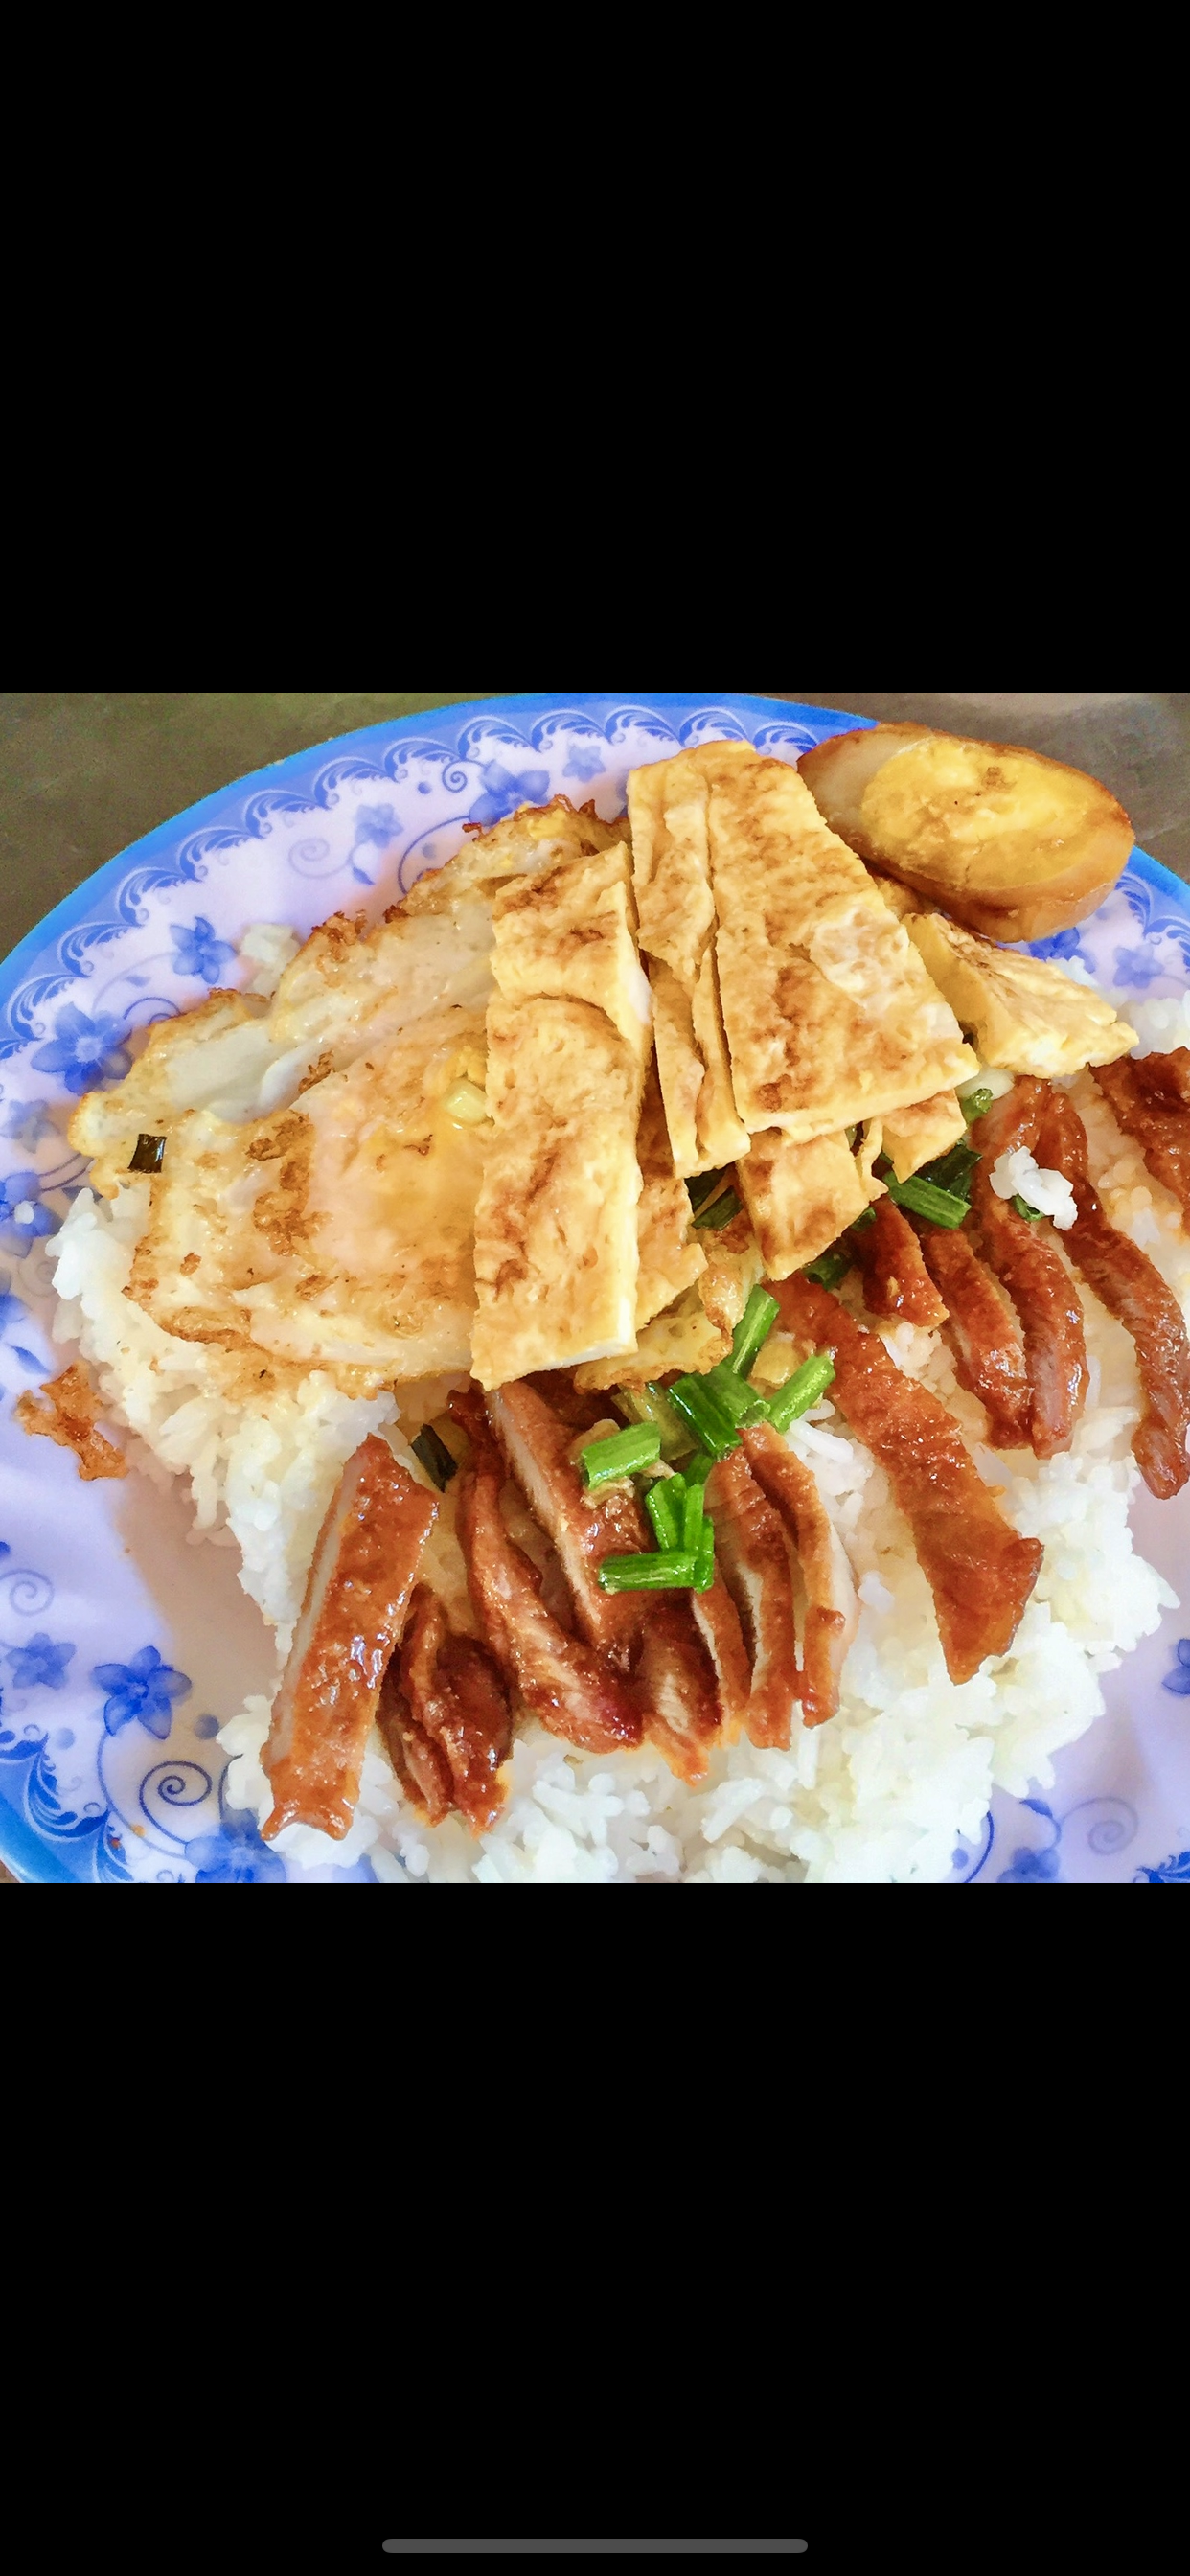 04.pork rice with 3 different eggs